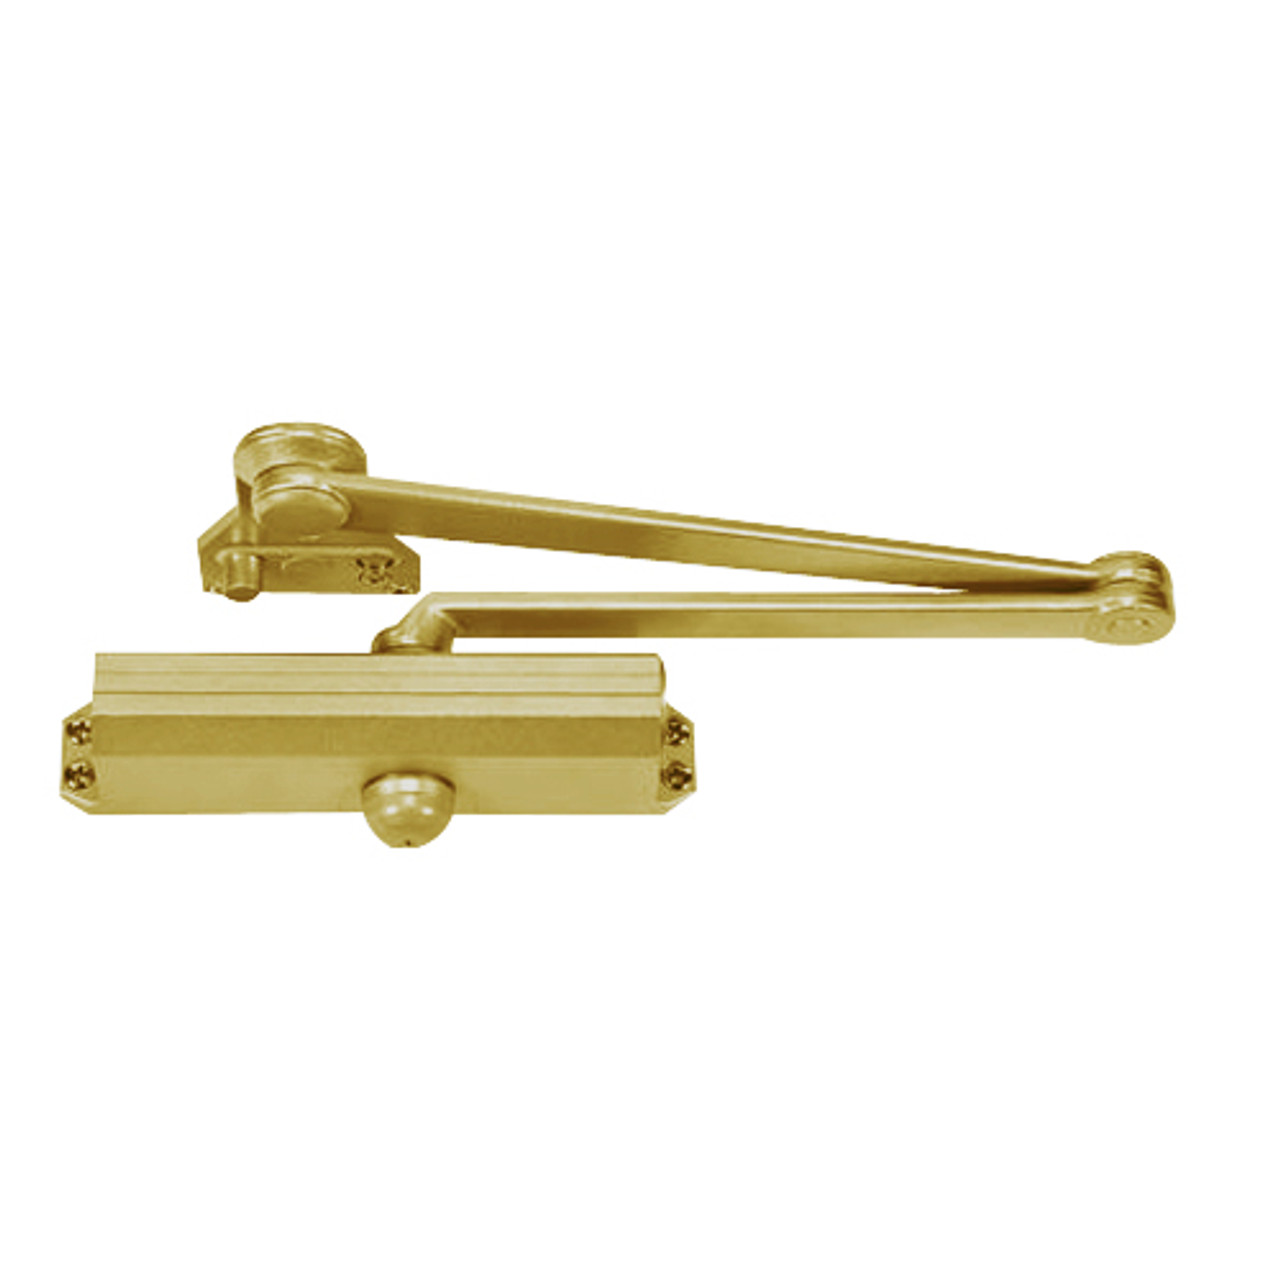 CPS1601T-696 Norton 1600 Series Hold Open Adjustable Door Closer with CloserPlus Spring Arm in Satin Brass Painted Finish